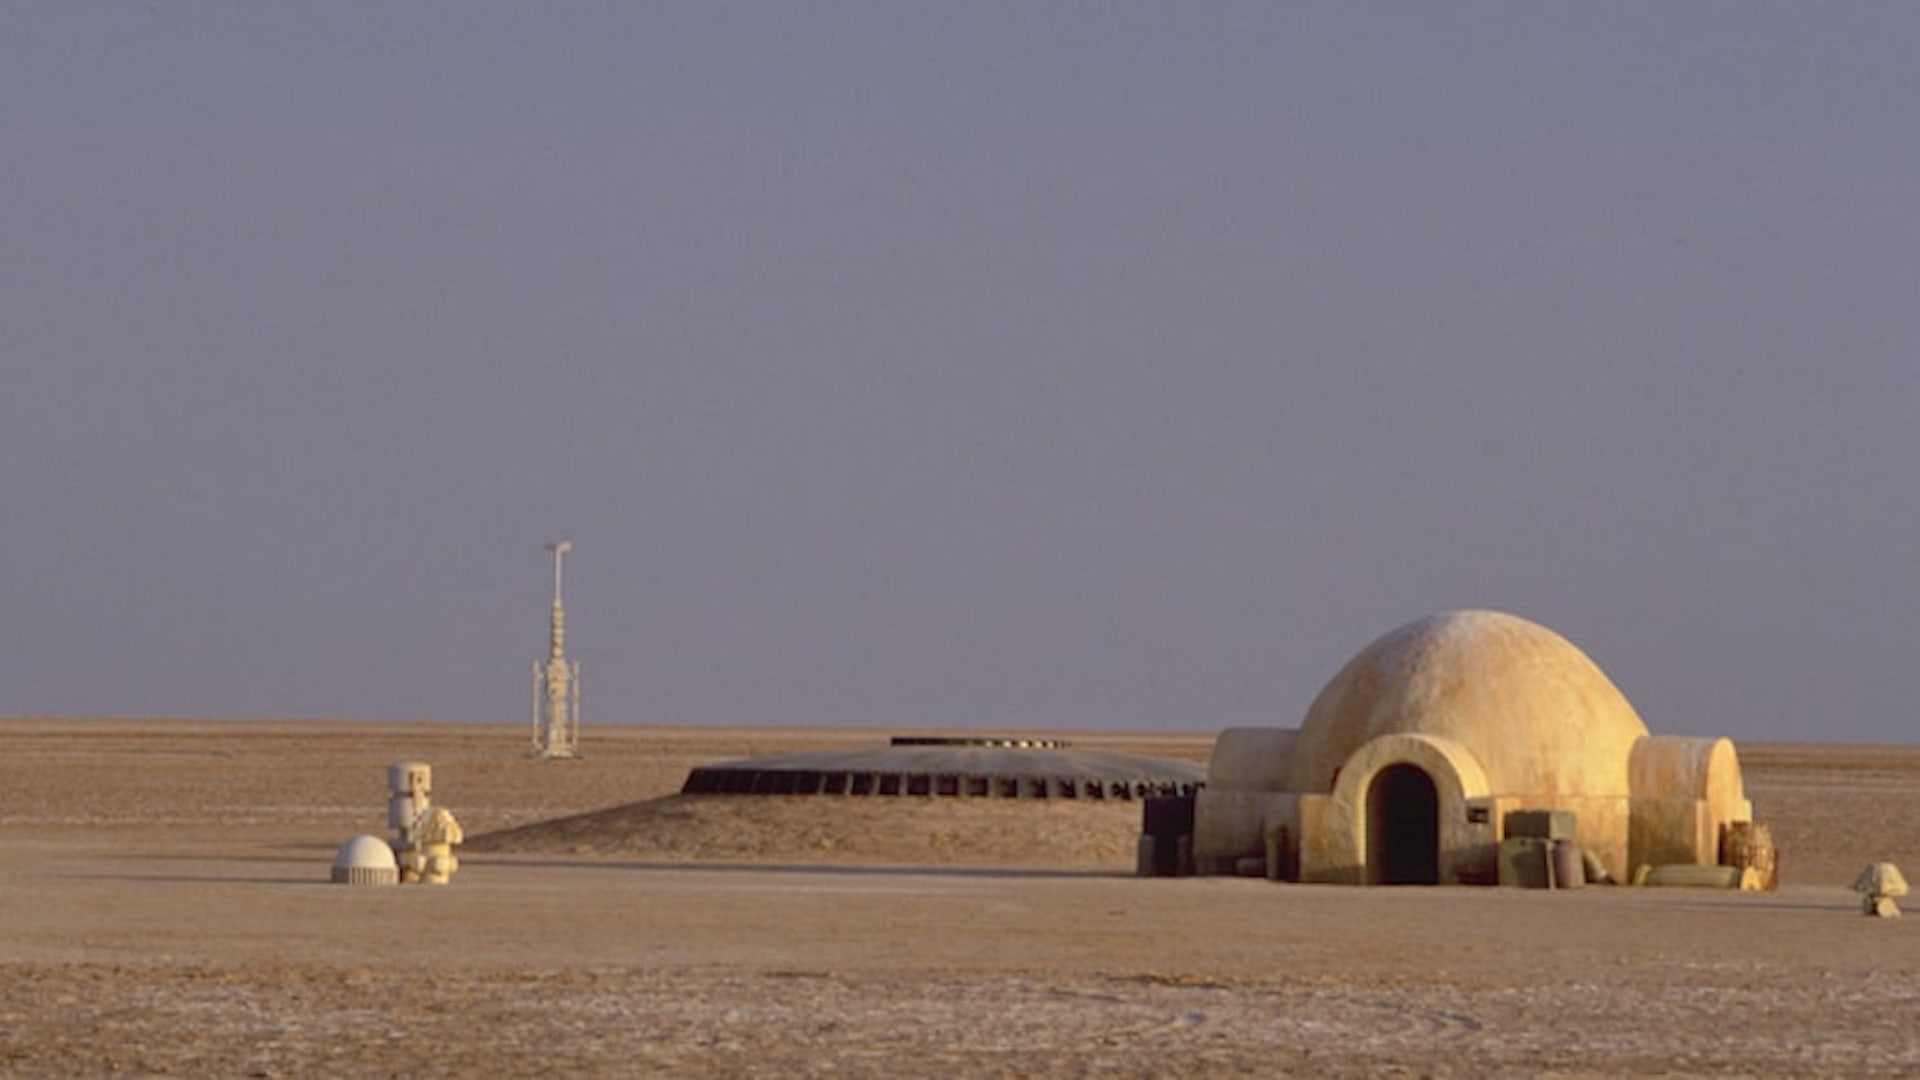 A photograph of the Star Wars IV set